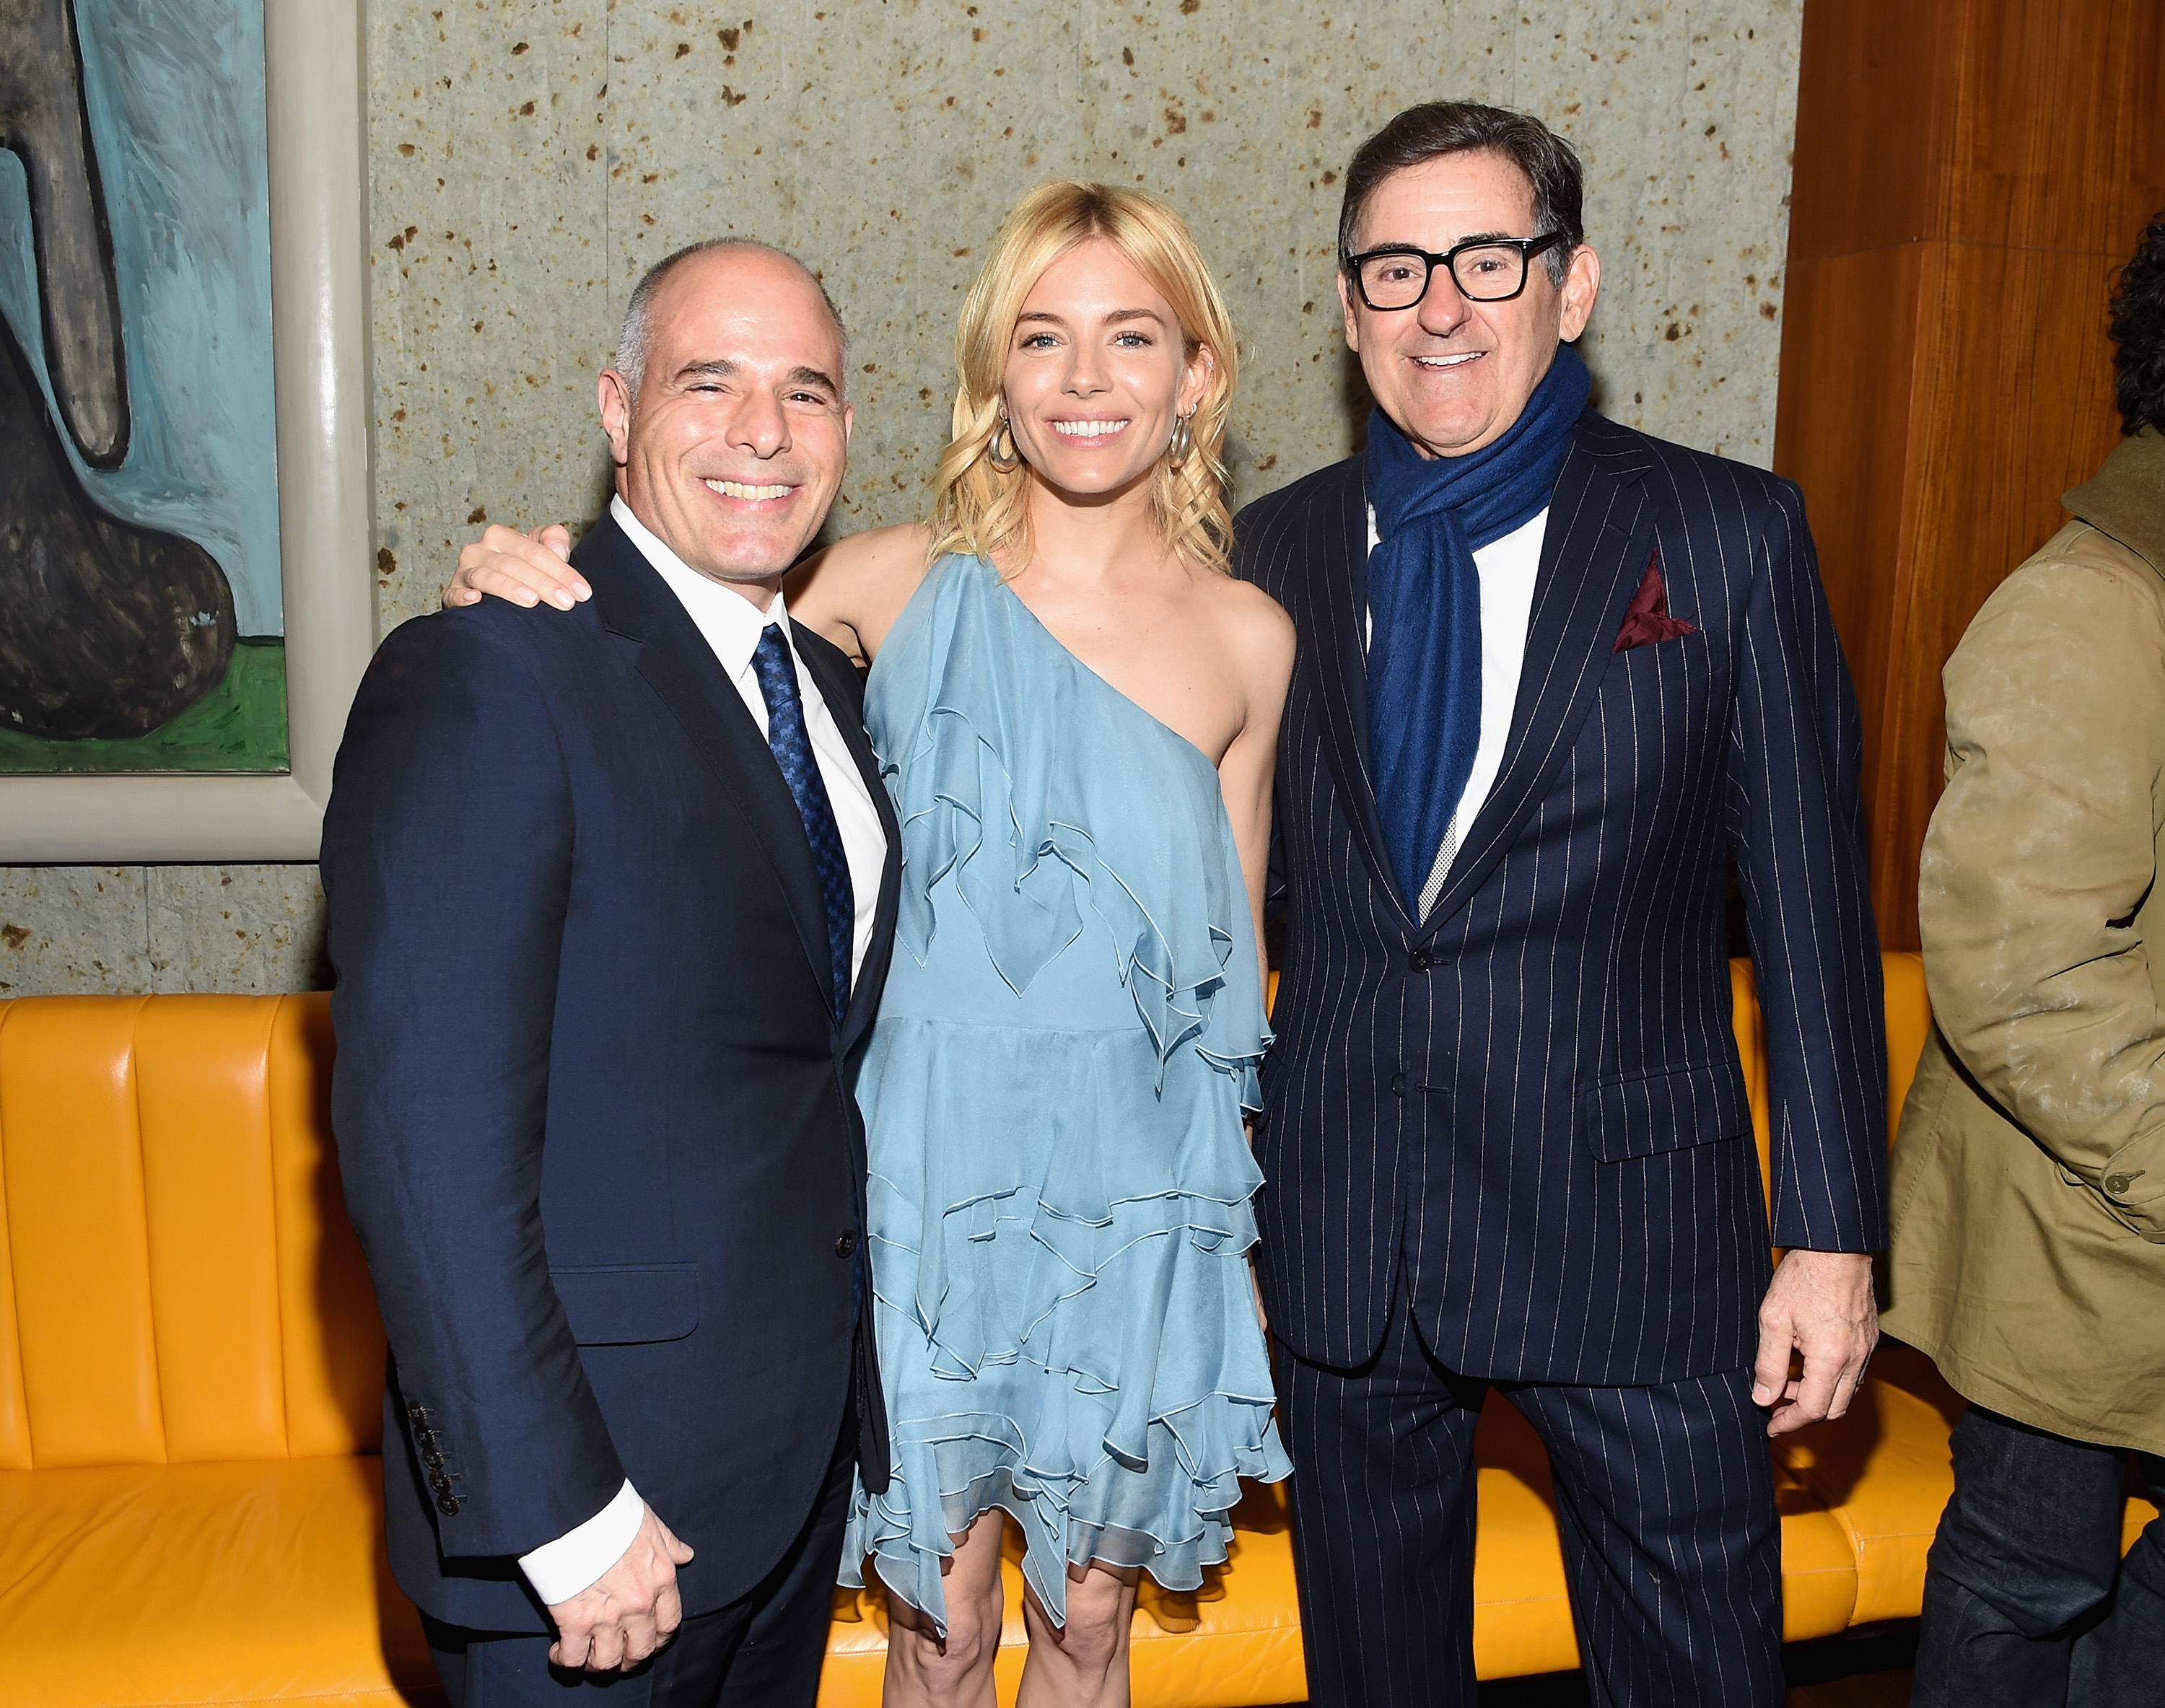 NEW YORK, NY - NOVEMBER 10:   (L-R) Mike Giannattasio, Sienna Miller, and honoree Peter M. Brant attend The 24th Montblanc De La Culture Arts Patronage Award at Kappo Masa on November 10, 2015 in New York City. 